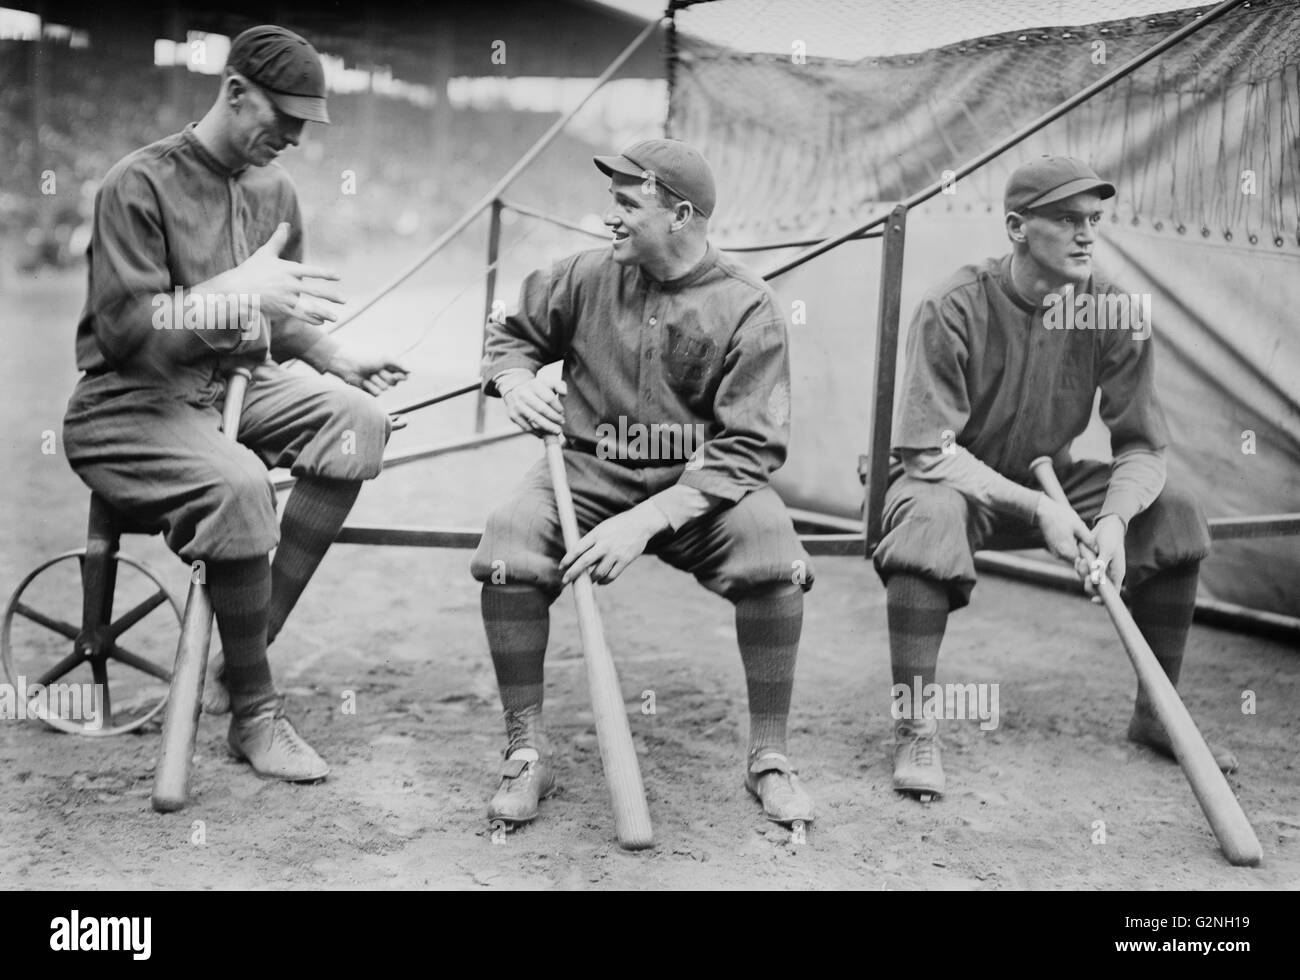 Hank Gowdy, Lefty Tyler, Joey Connolly, Major League Baseball Players, Boston Braves, Portrait, vers 1914 Banque D'Images